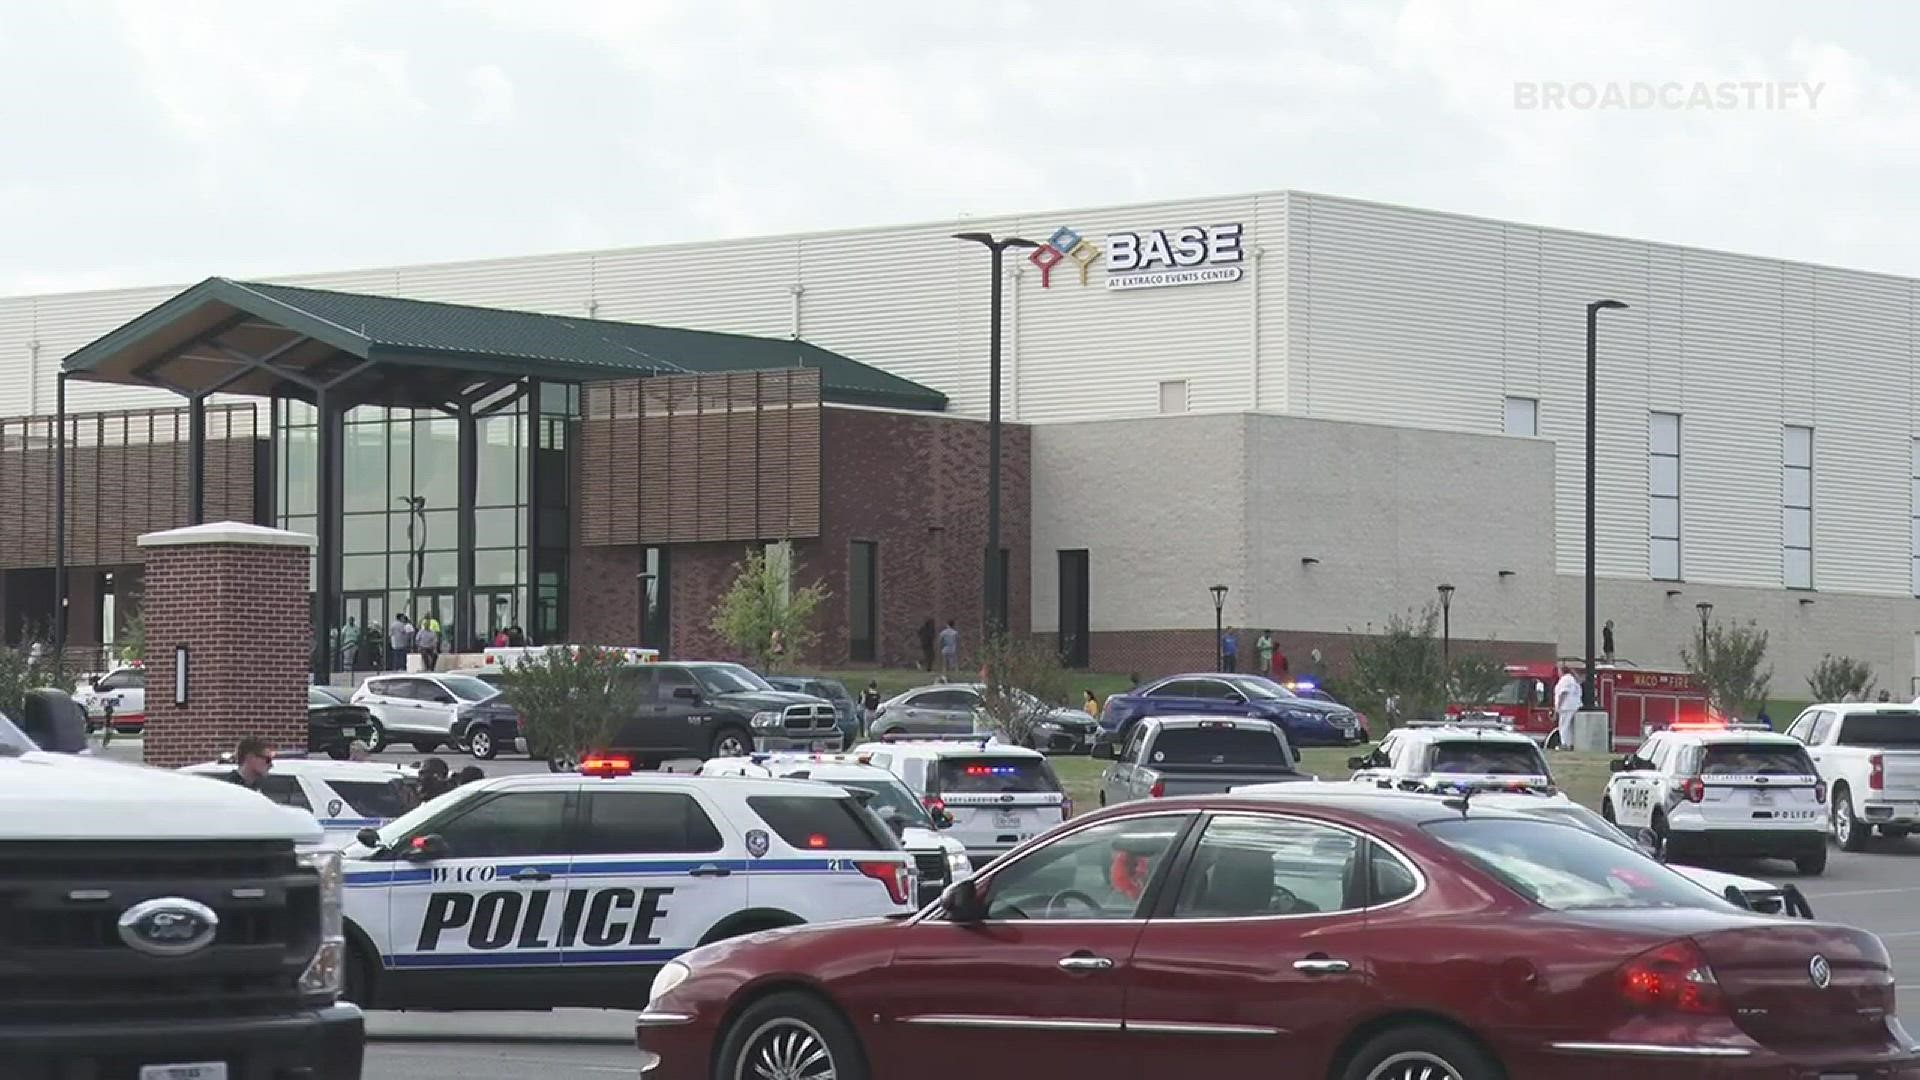 While clearing out the buildings, police learned that the report was not credible, Waco PD said.